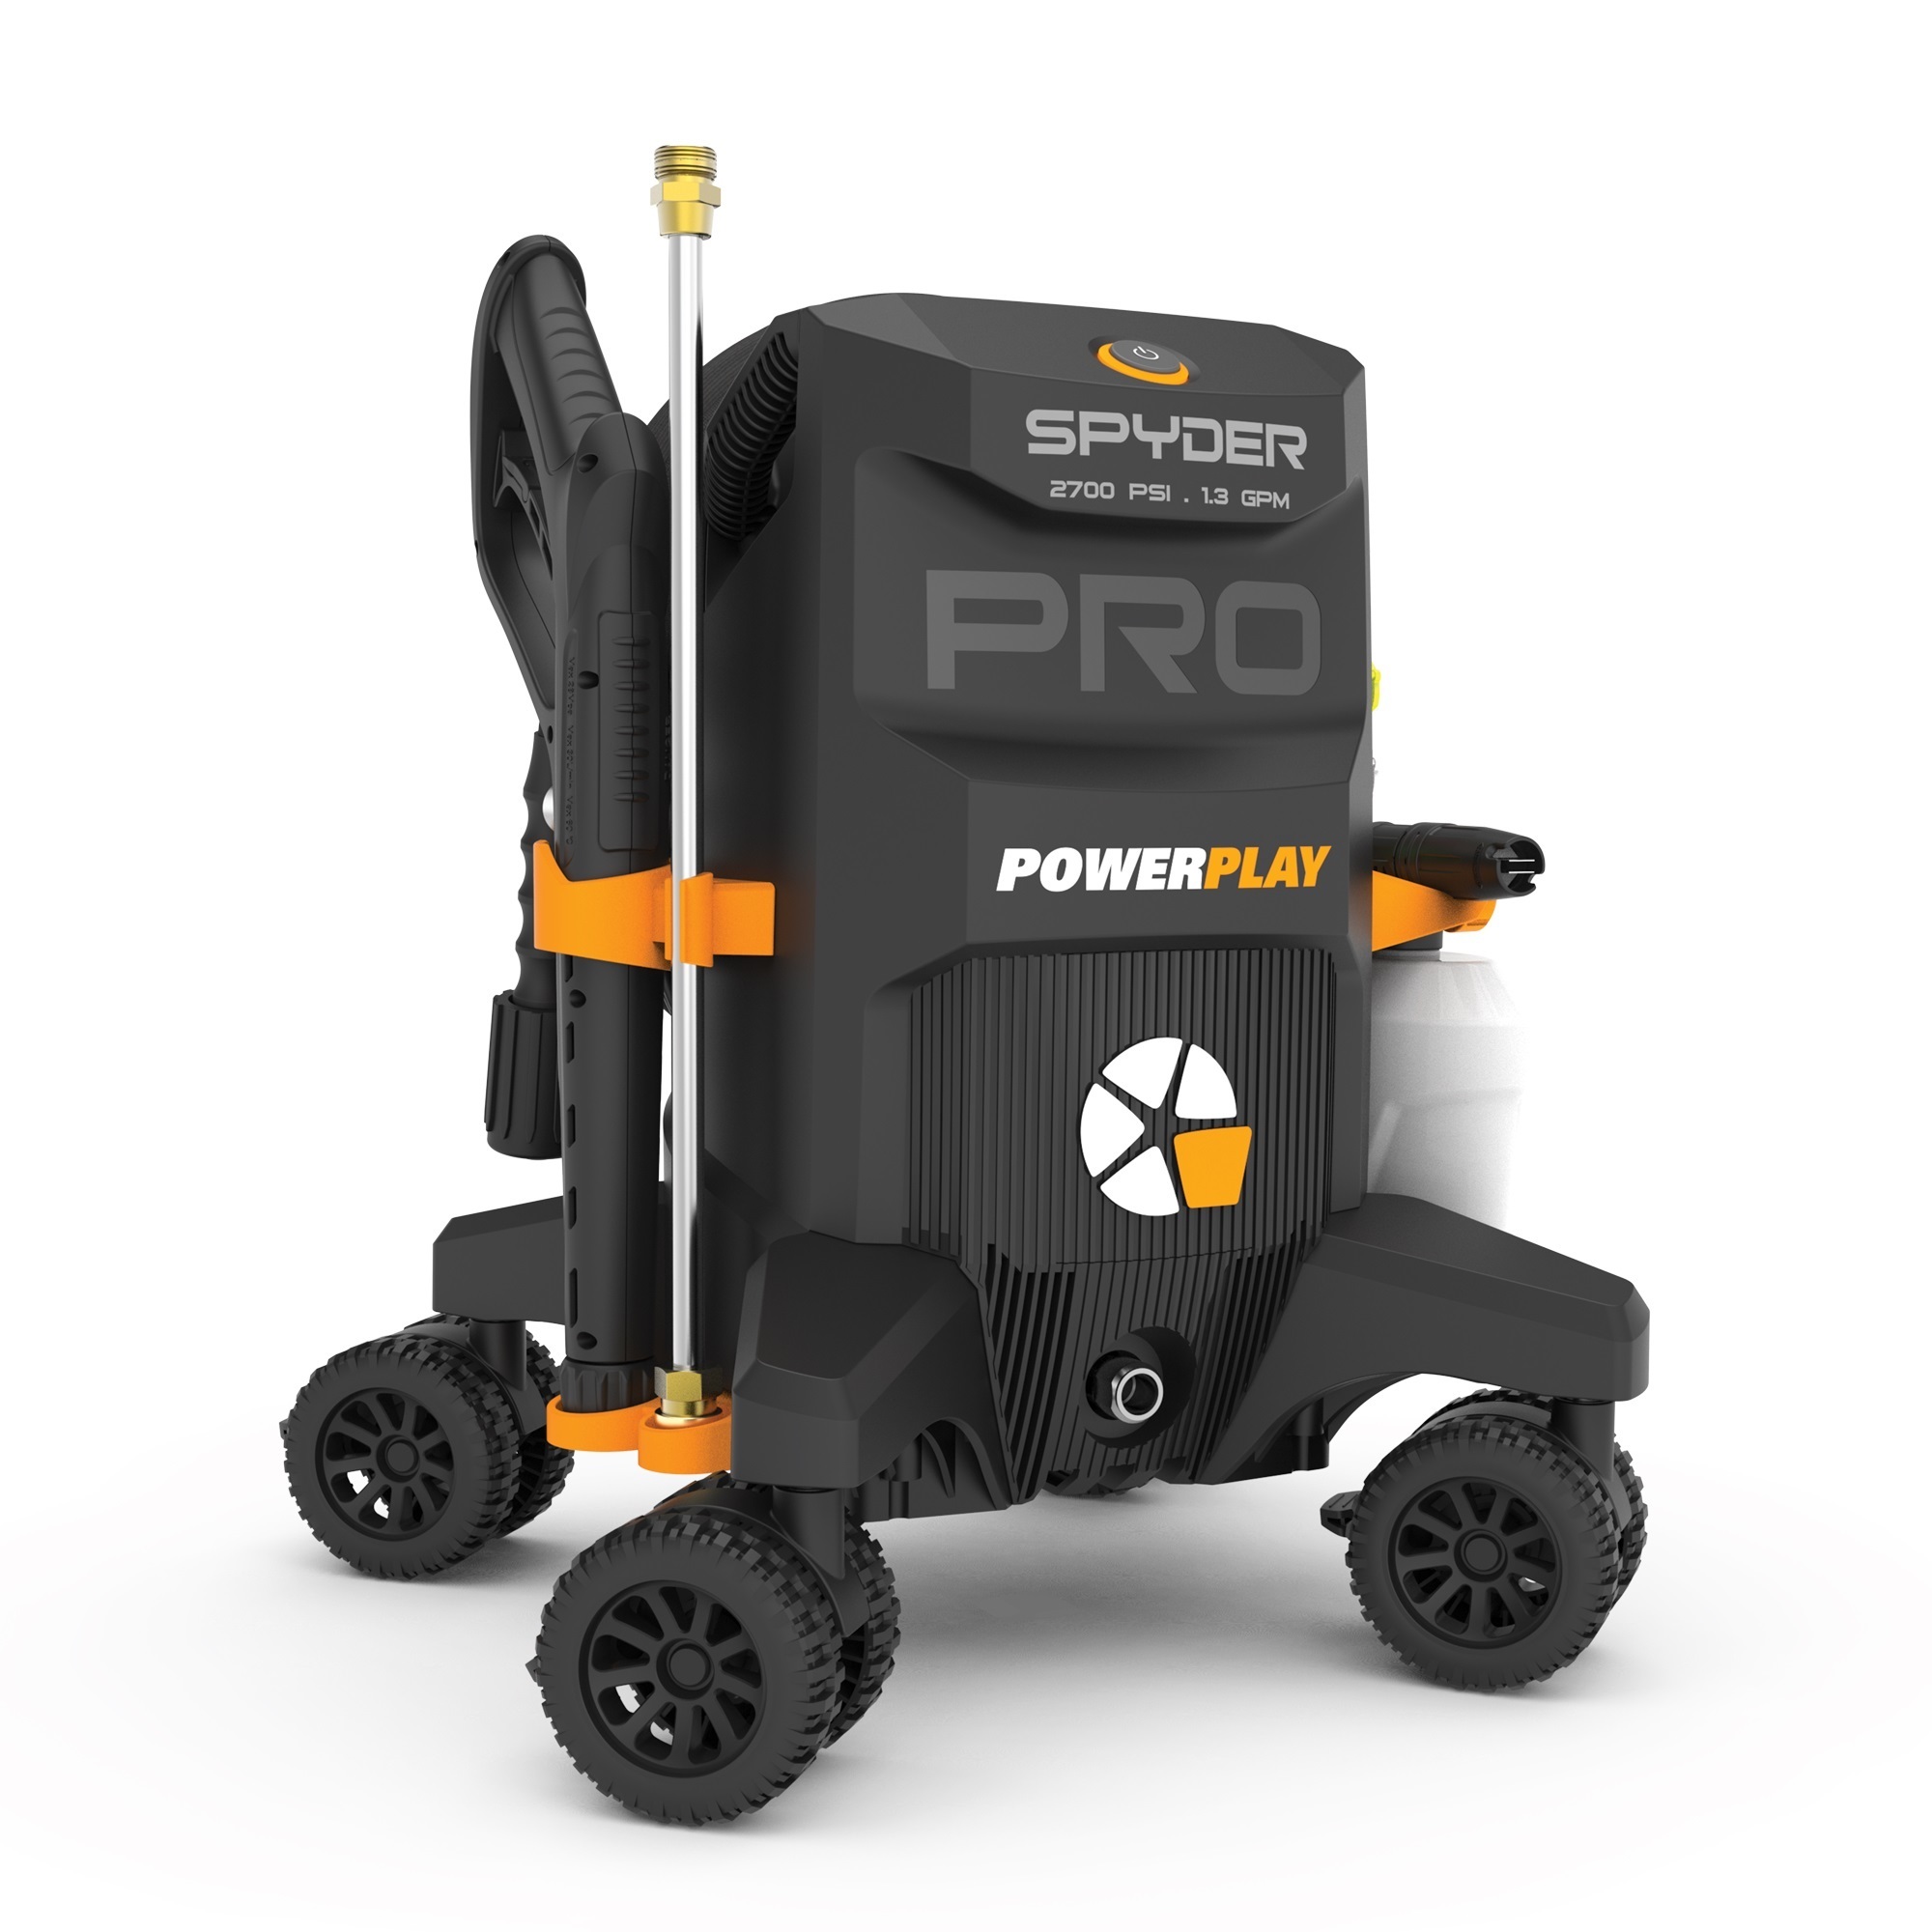 Powerplay, SPYDER PRO 2700PSI Electric Pressure Washer, Pressure 2700 PSI, Flow 1.4 GPM, Volts 120 Model SPY2700XP